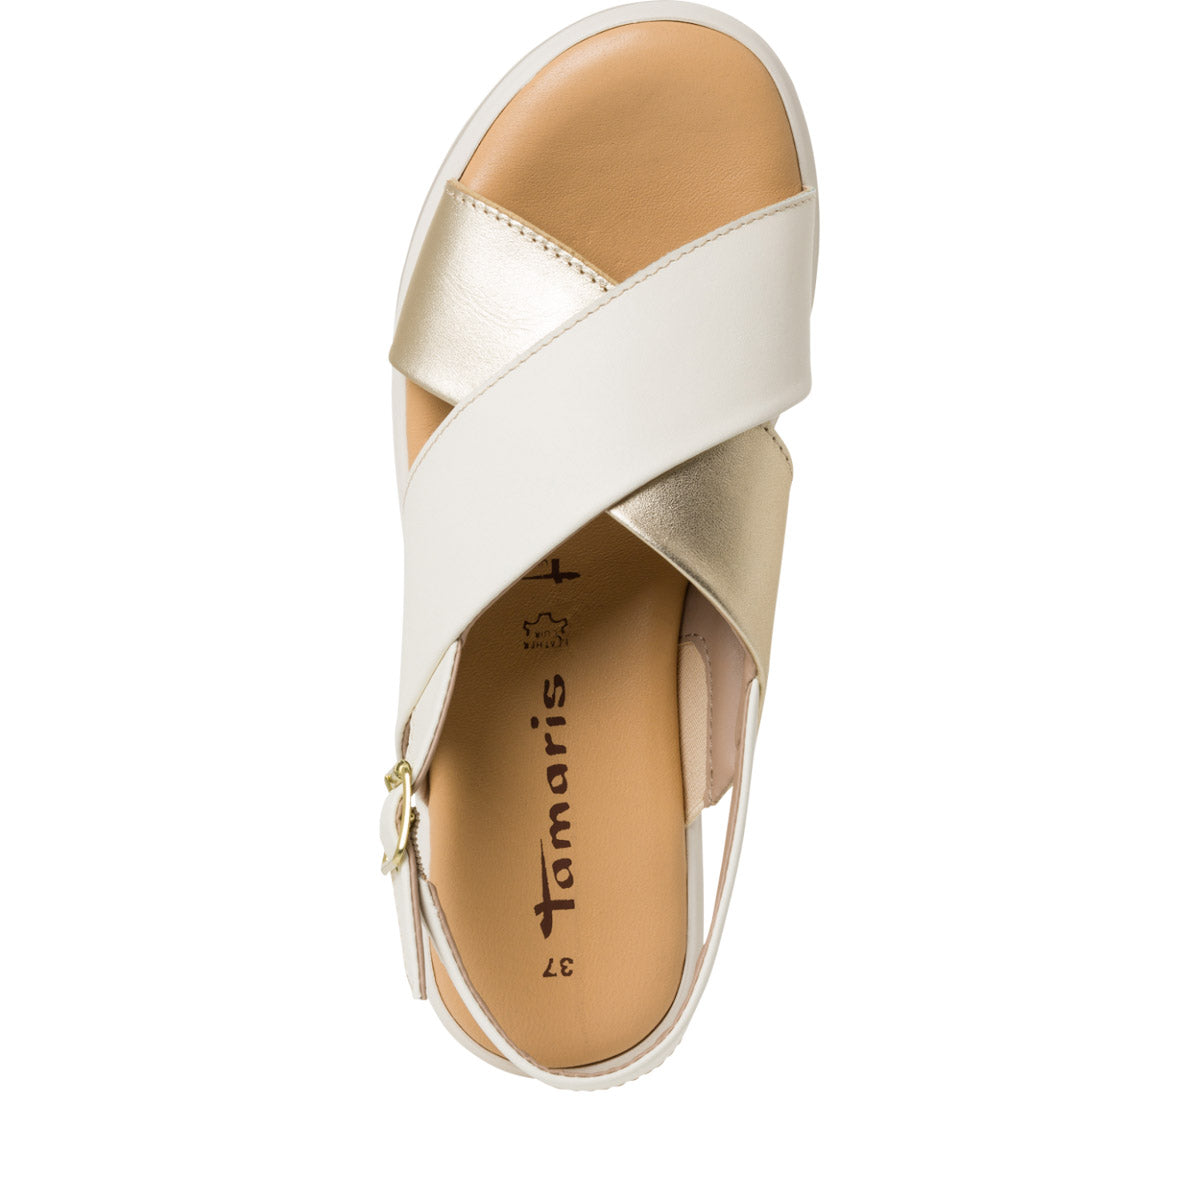 Tamaris Cream and Gold Leather Wedge Sandals with Criss-Cross Design